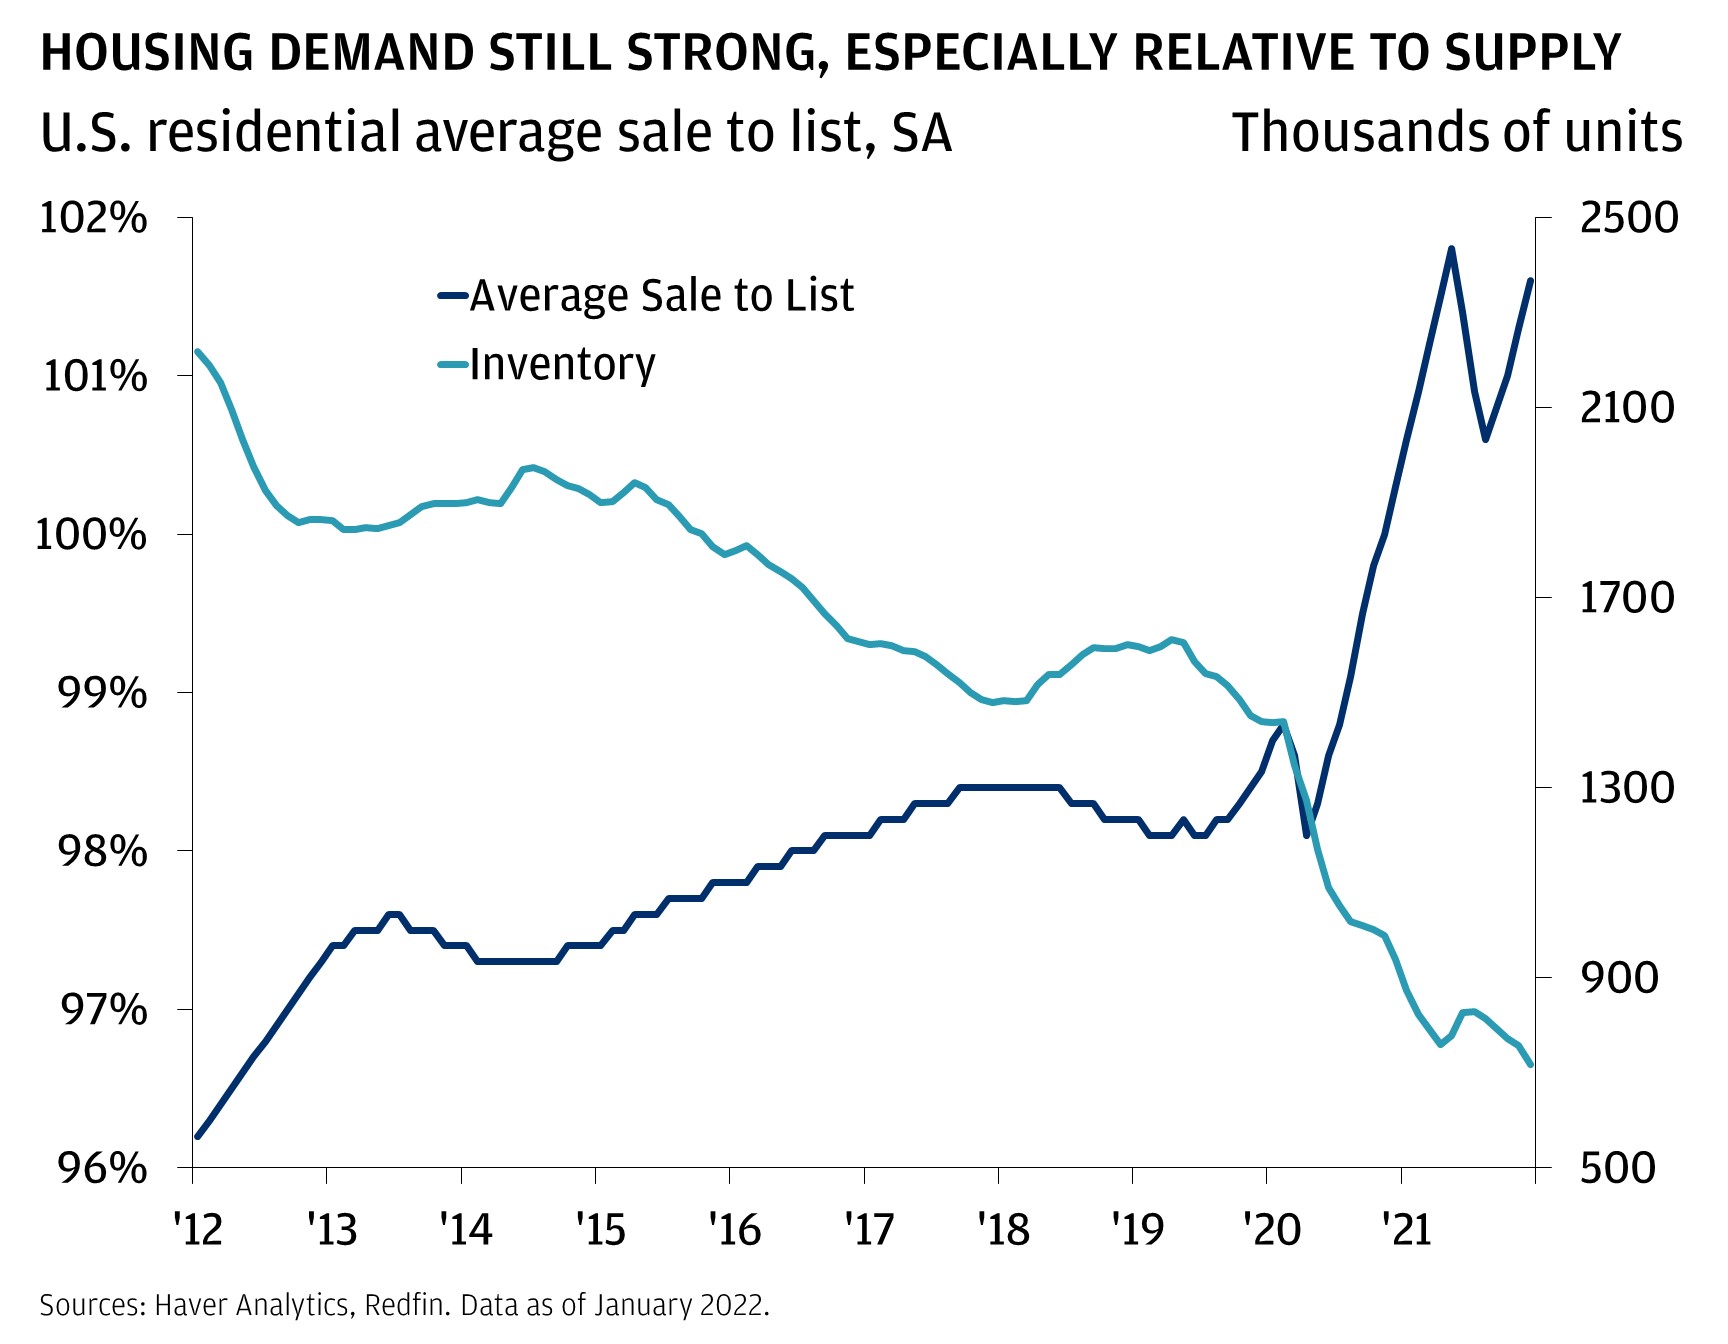 HOUSING DEMAND STILL STRONG, ESPECIALLY RELATIVE TO SUPPLY. This chart shows the U.S. average sale-to-list (SA) and residential inventory from 2012 to January 2022.